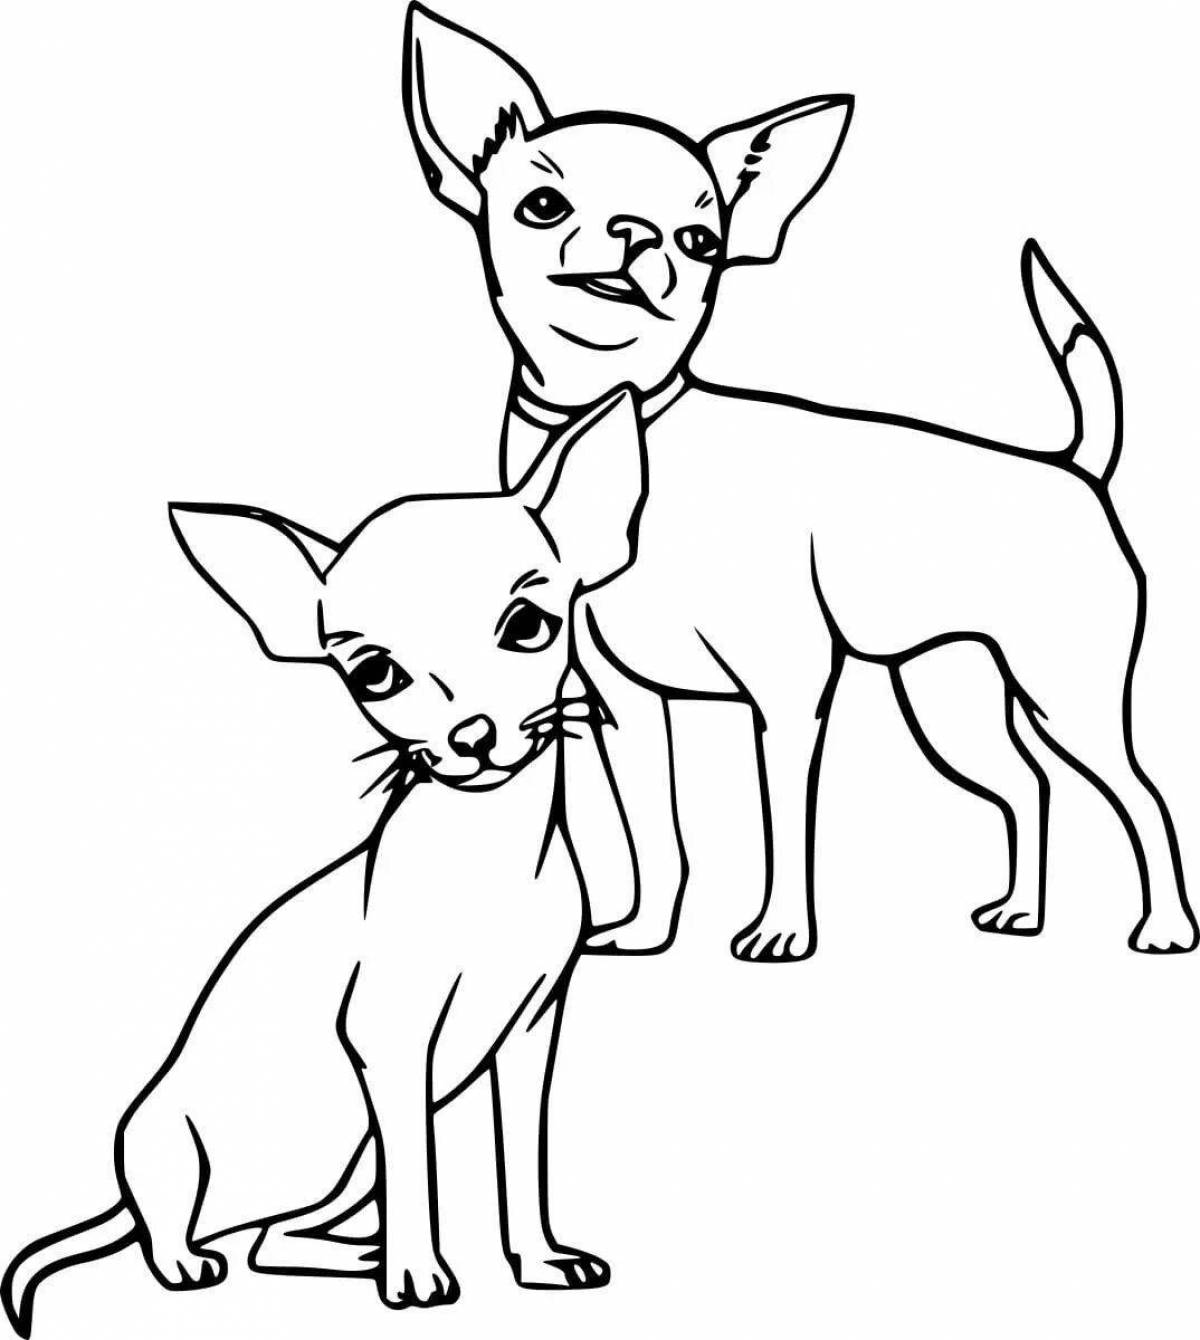 Chihuahua for kids #1